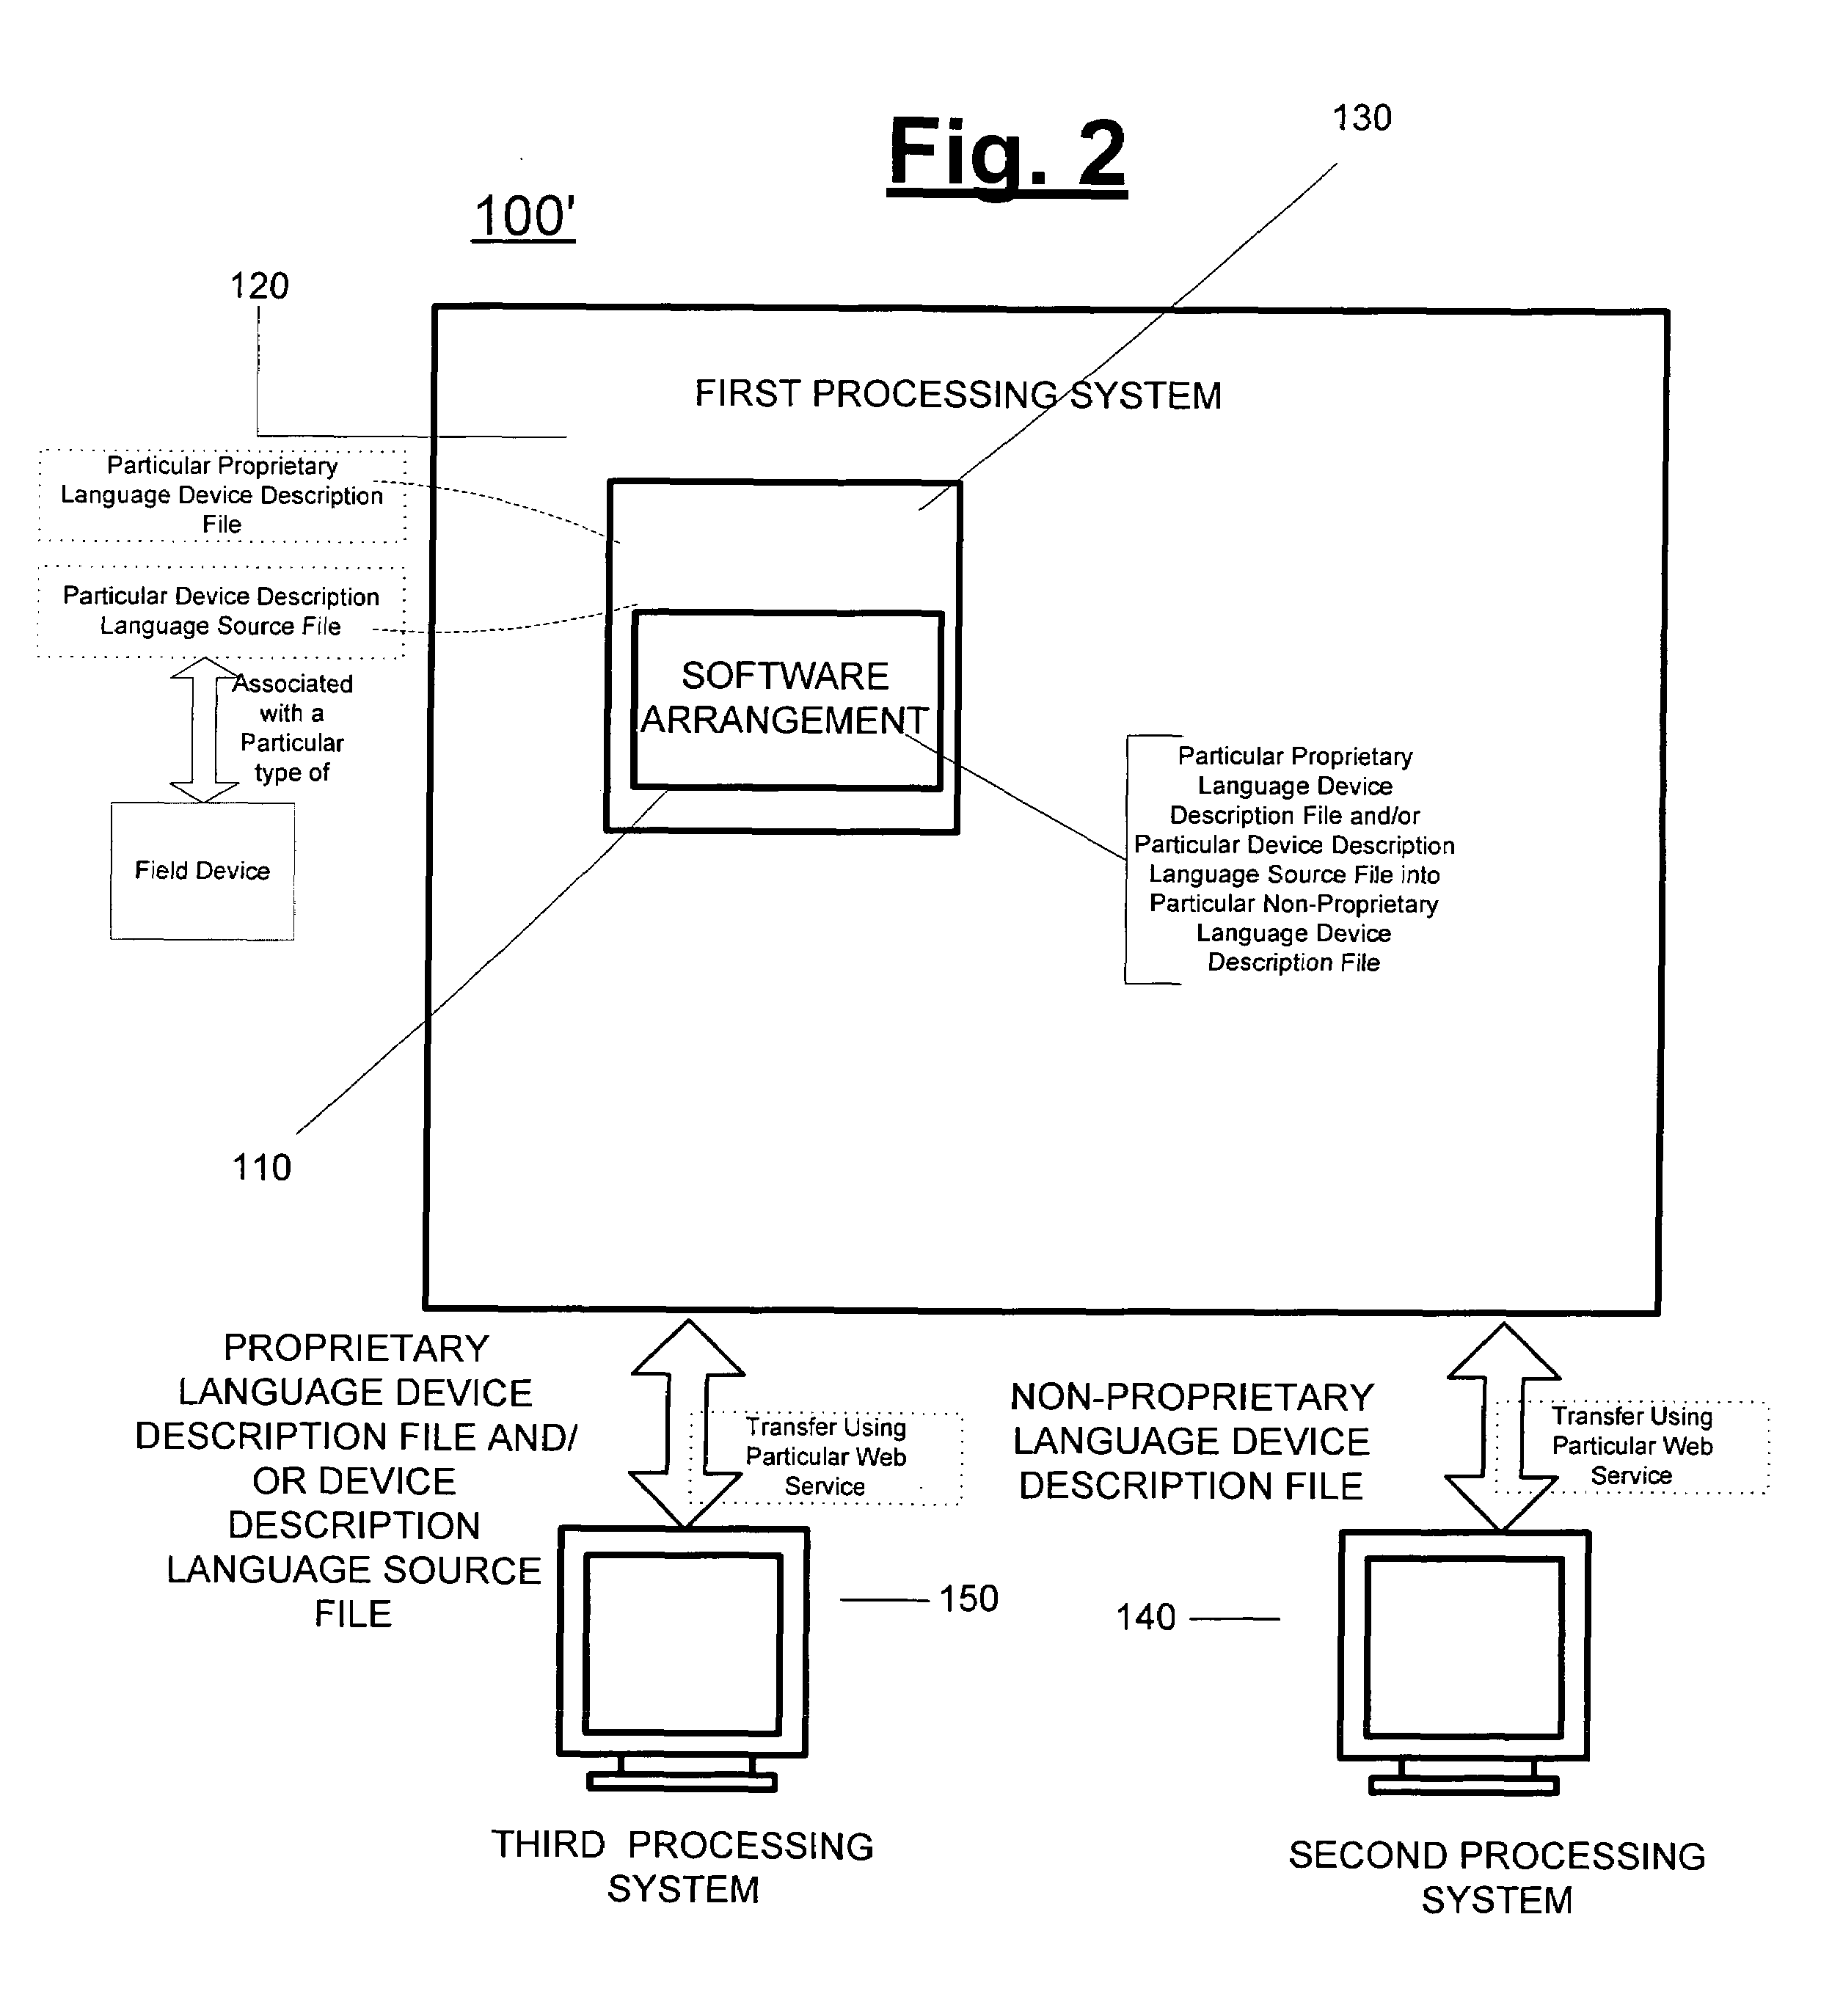 Arrangements, storage mediums and methods for transmitting a non-proprietary language device description file associated with a field device using a web service